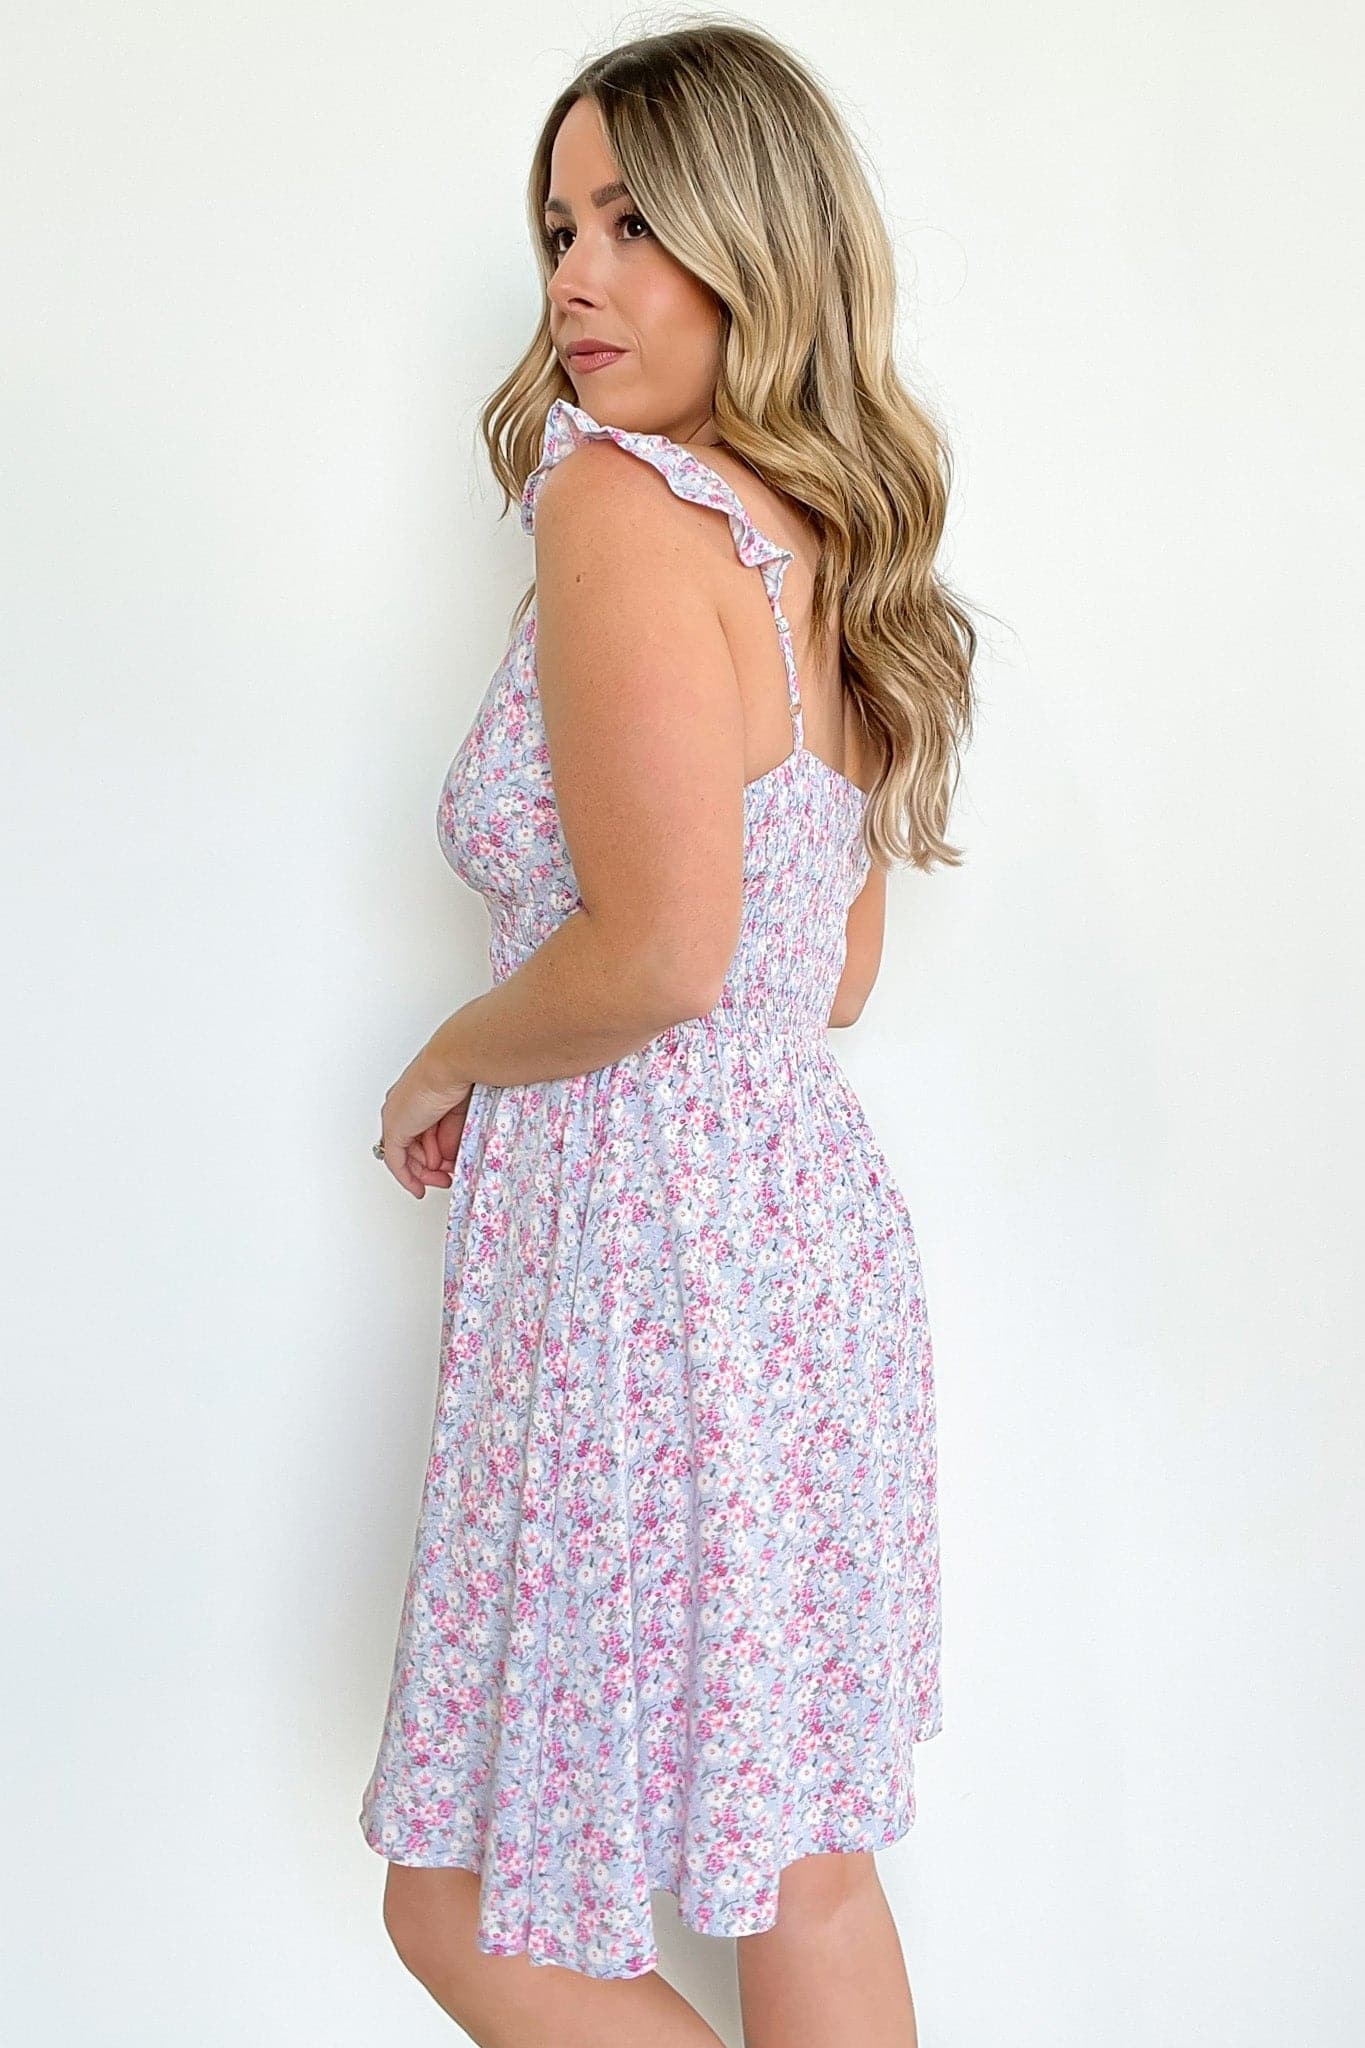  Desti Floral Ruffle Smocked Dress | CURVE - FINAL SALE - Madison and Mallory